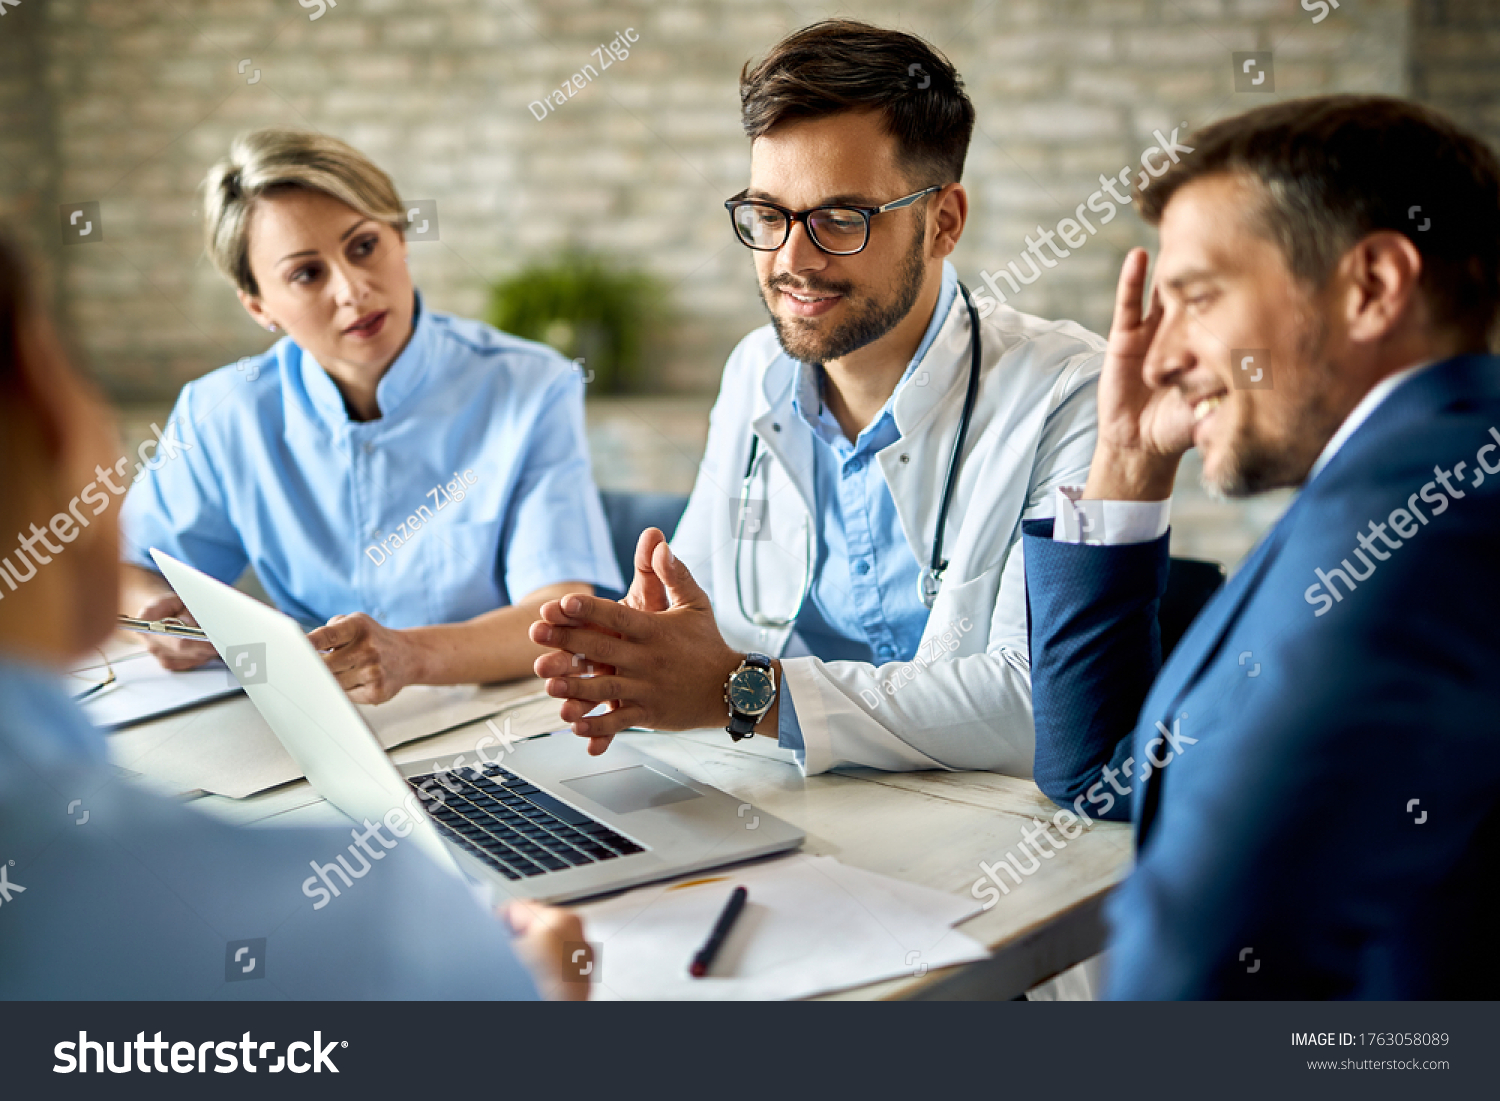 https://www.techneplus.com/wp-content/uploads/2023/01/stock-photo-group-of-healthcare-workers-and-businessman-using-laptop-while-having-a-meeting-in-the-office-1763058089.jpg